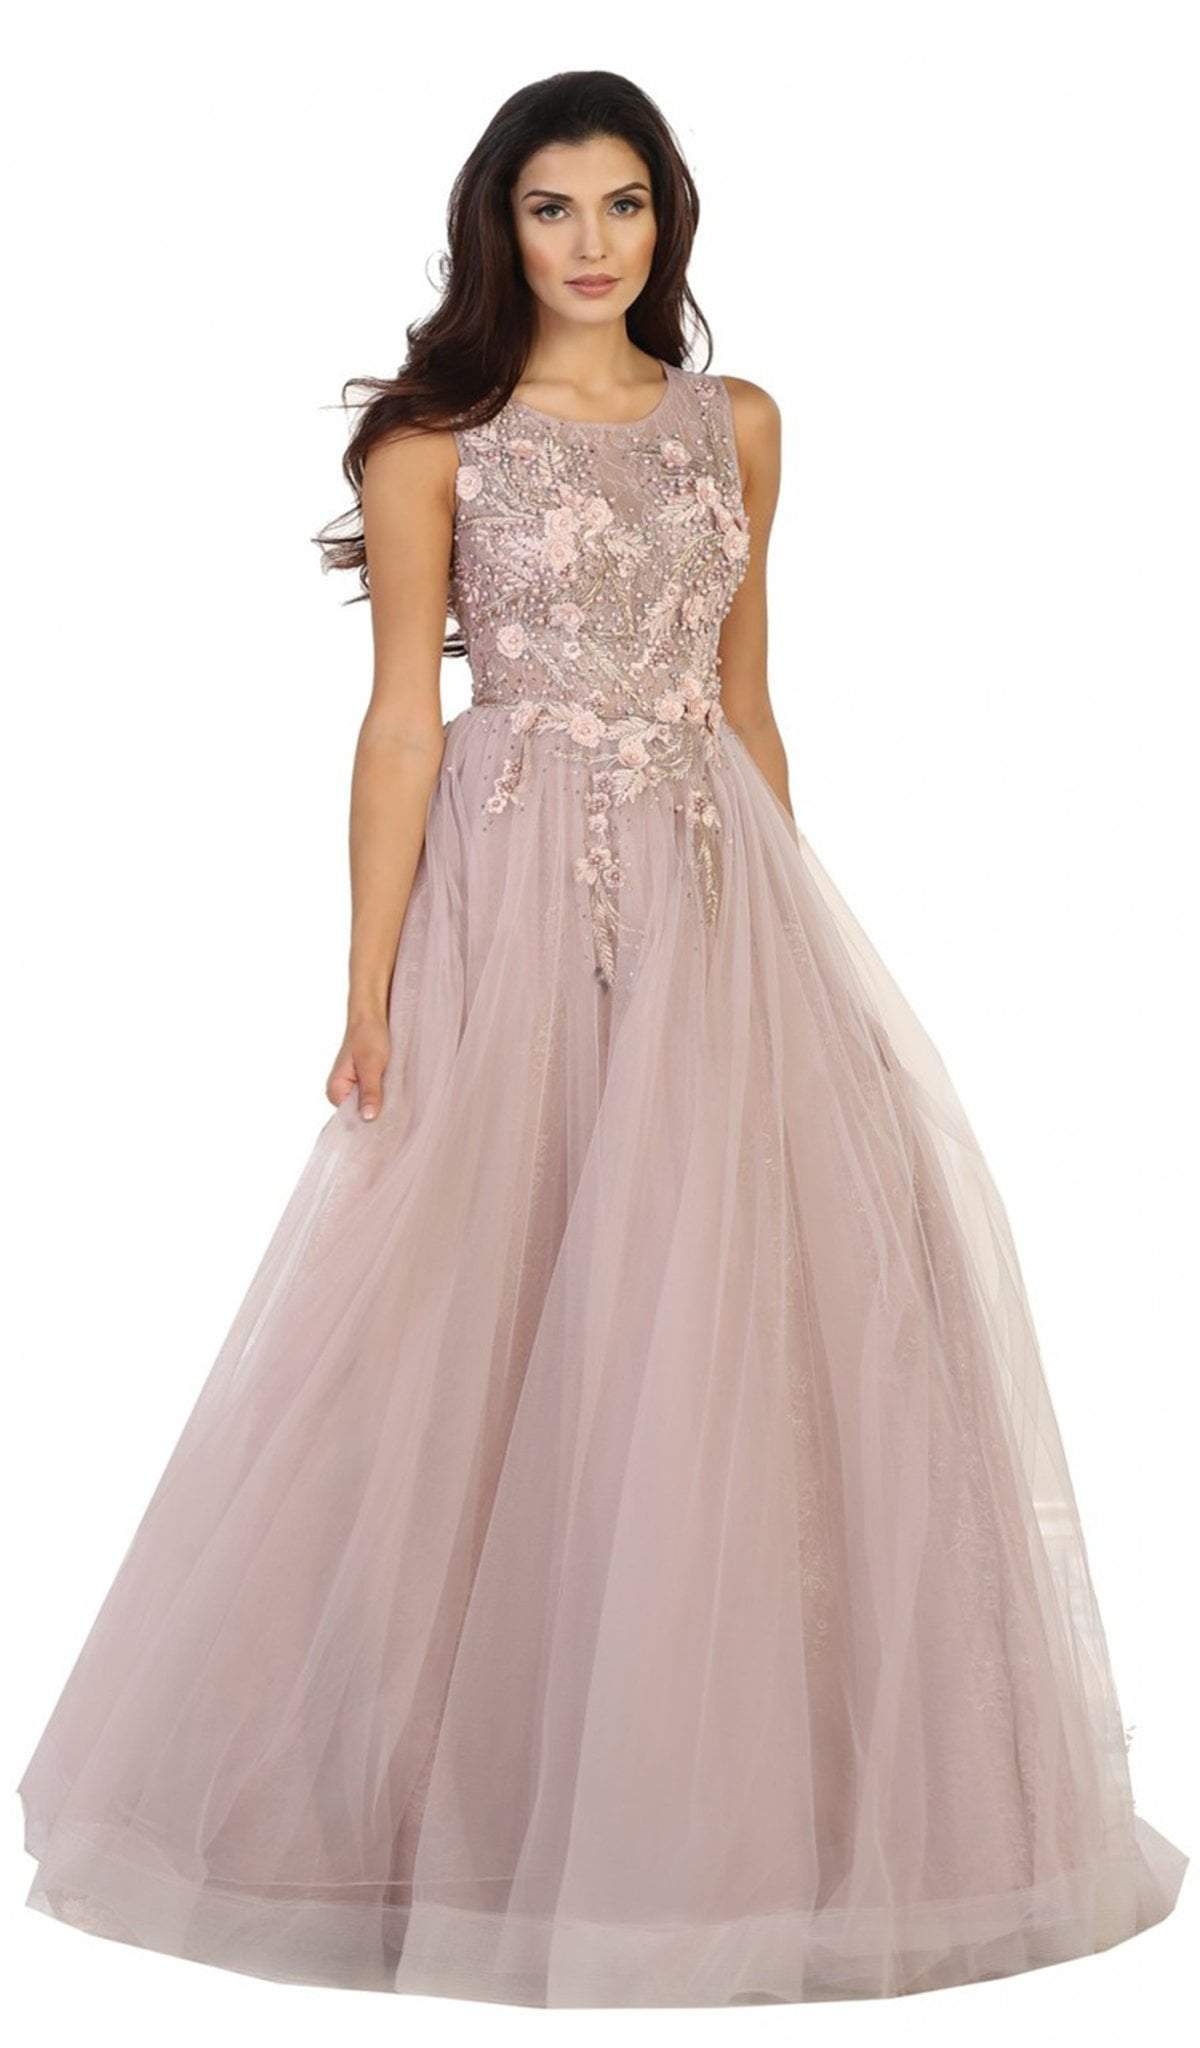 May Queen - RQ7527 Sleeveless Pearl Embellished Evening Gown Ball Gowns 4 / Mauve